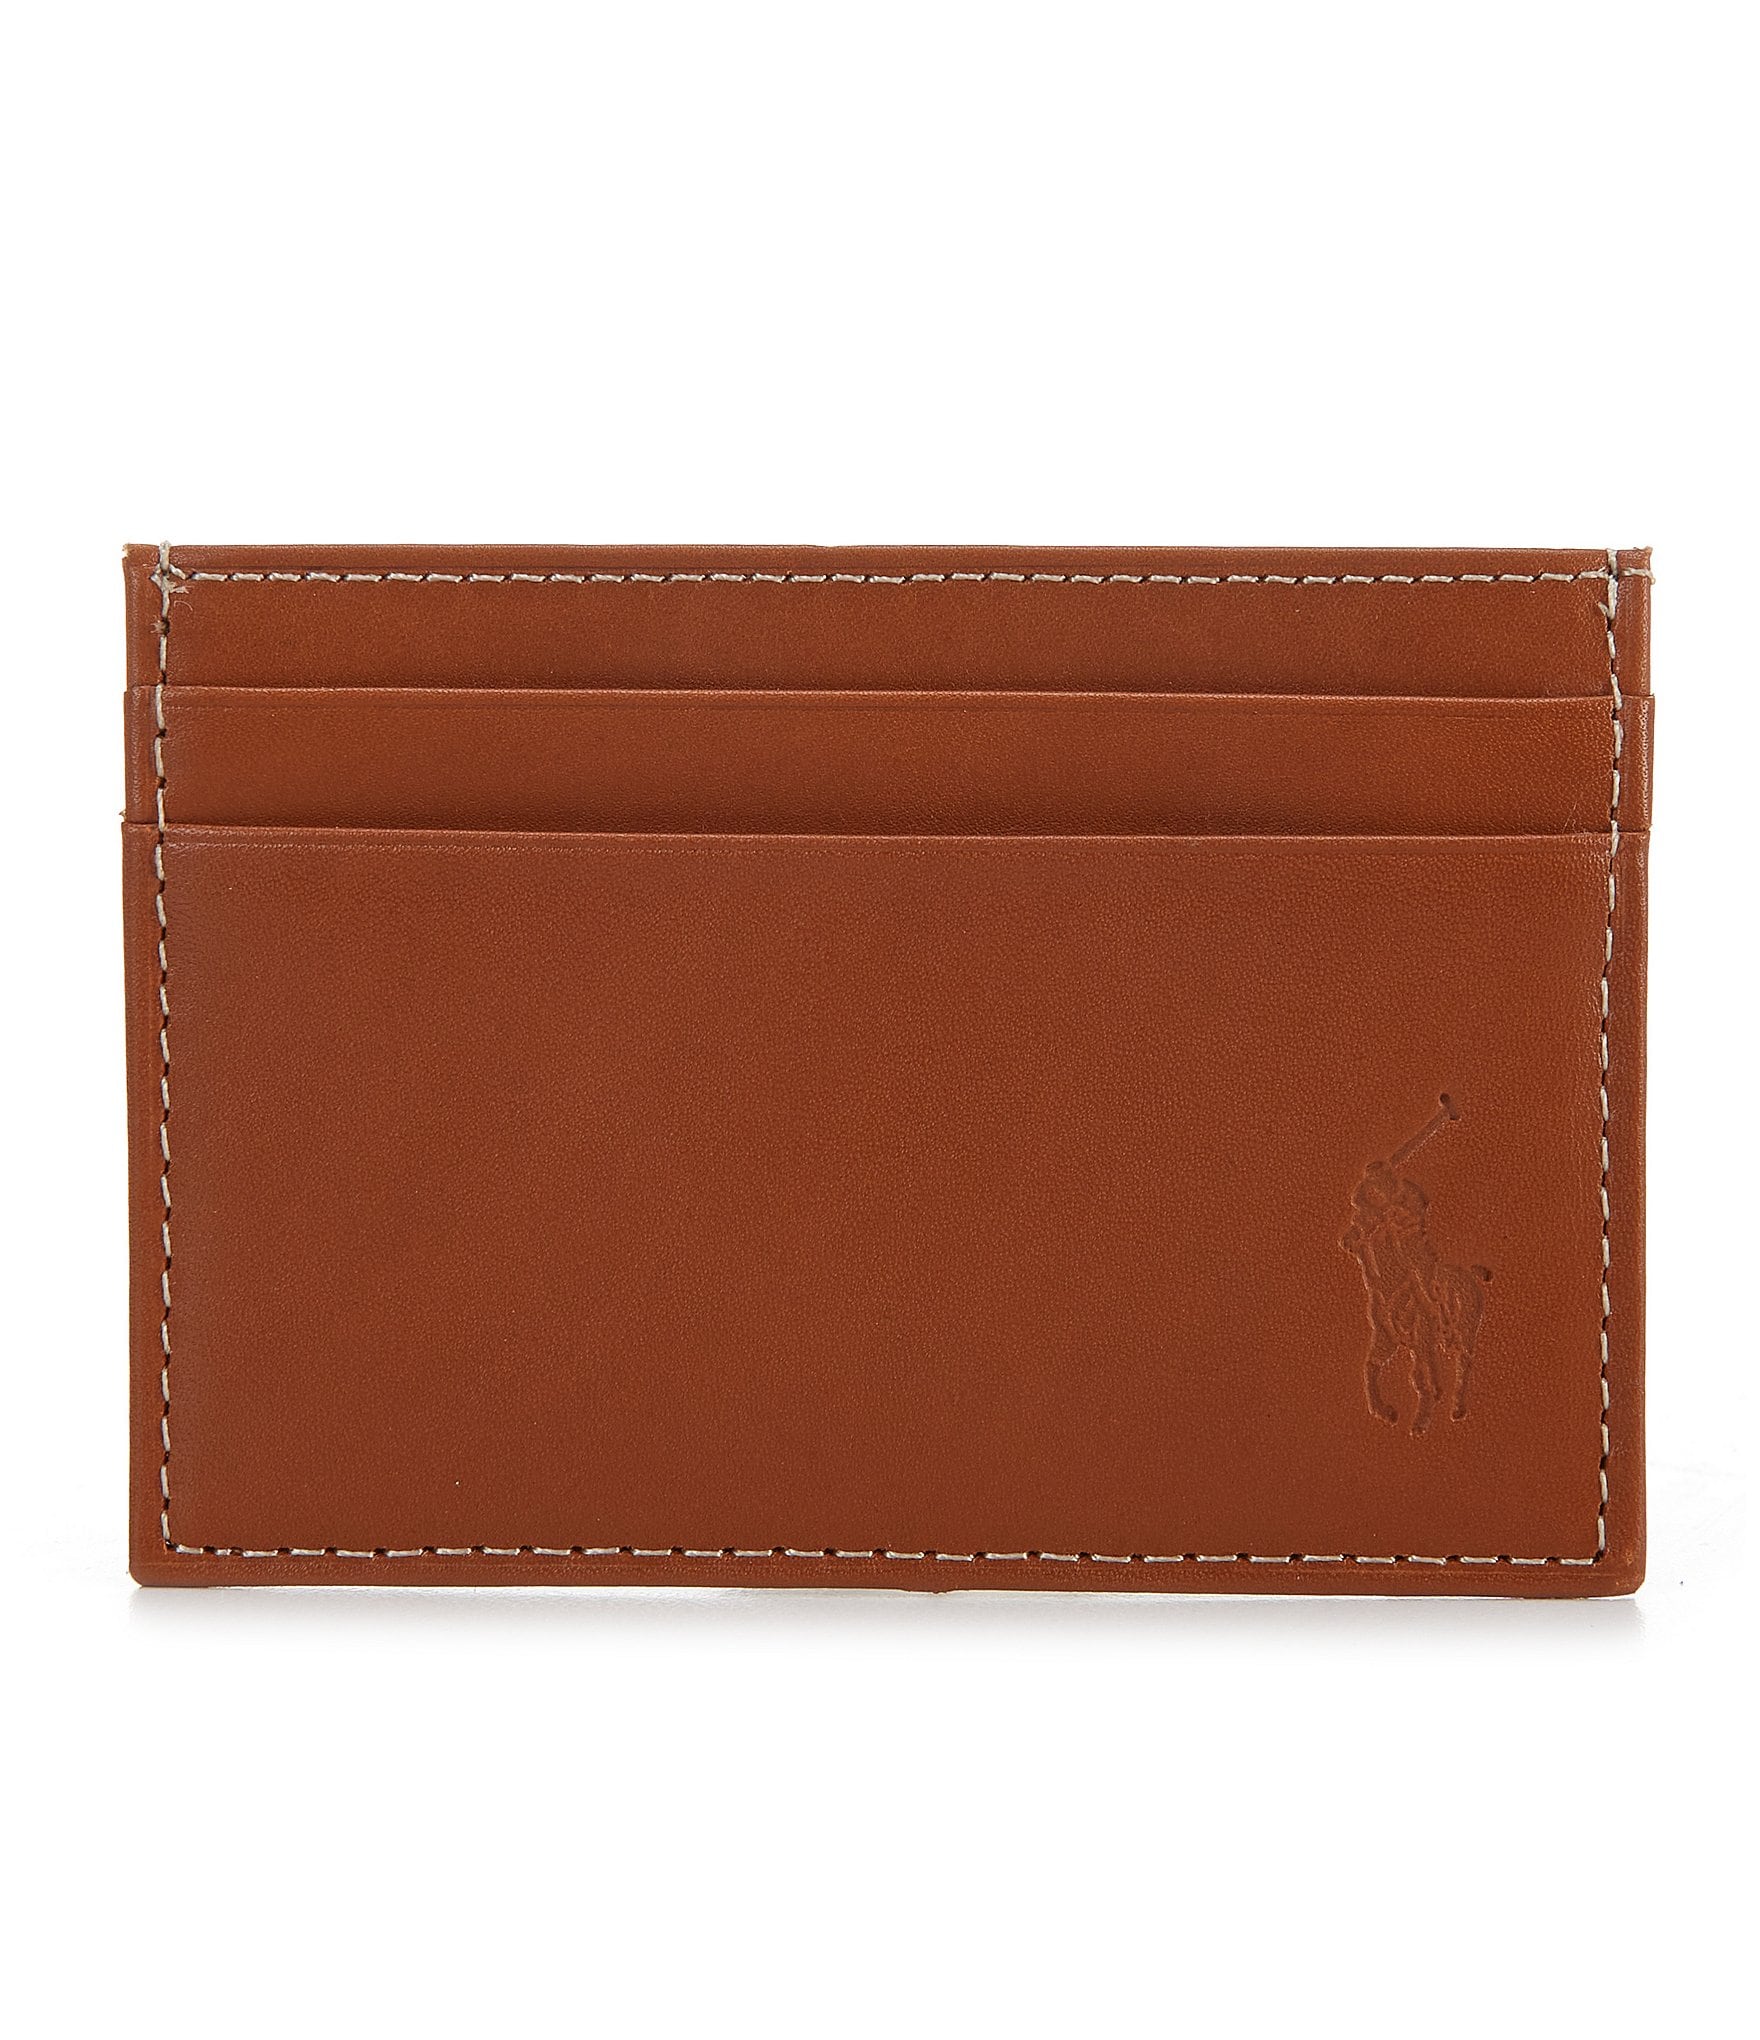 Polo Ralph Lauren Burnished Leather Card Case With Money Clip | Dillard's